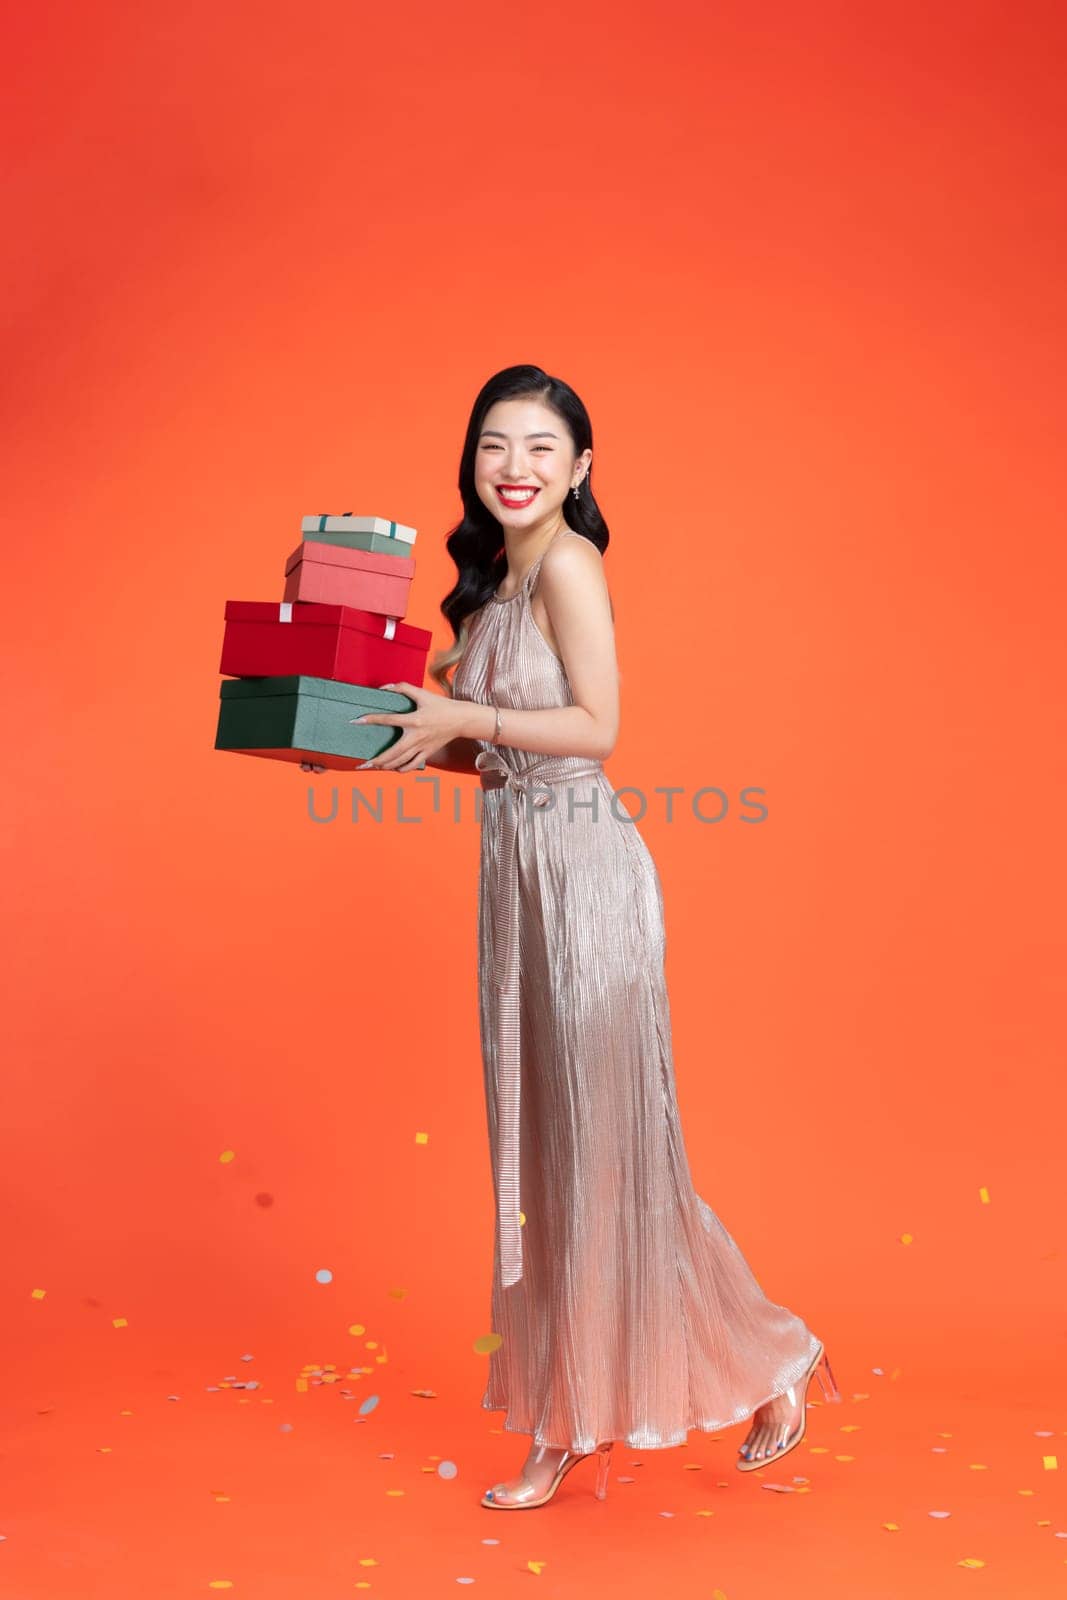 Cheerful young woman in shiny dress holding heap of presents, looking aside on red background